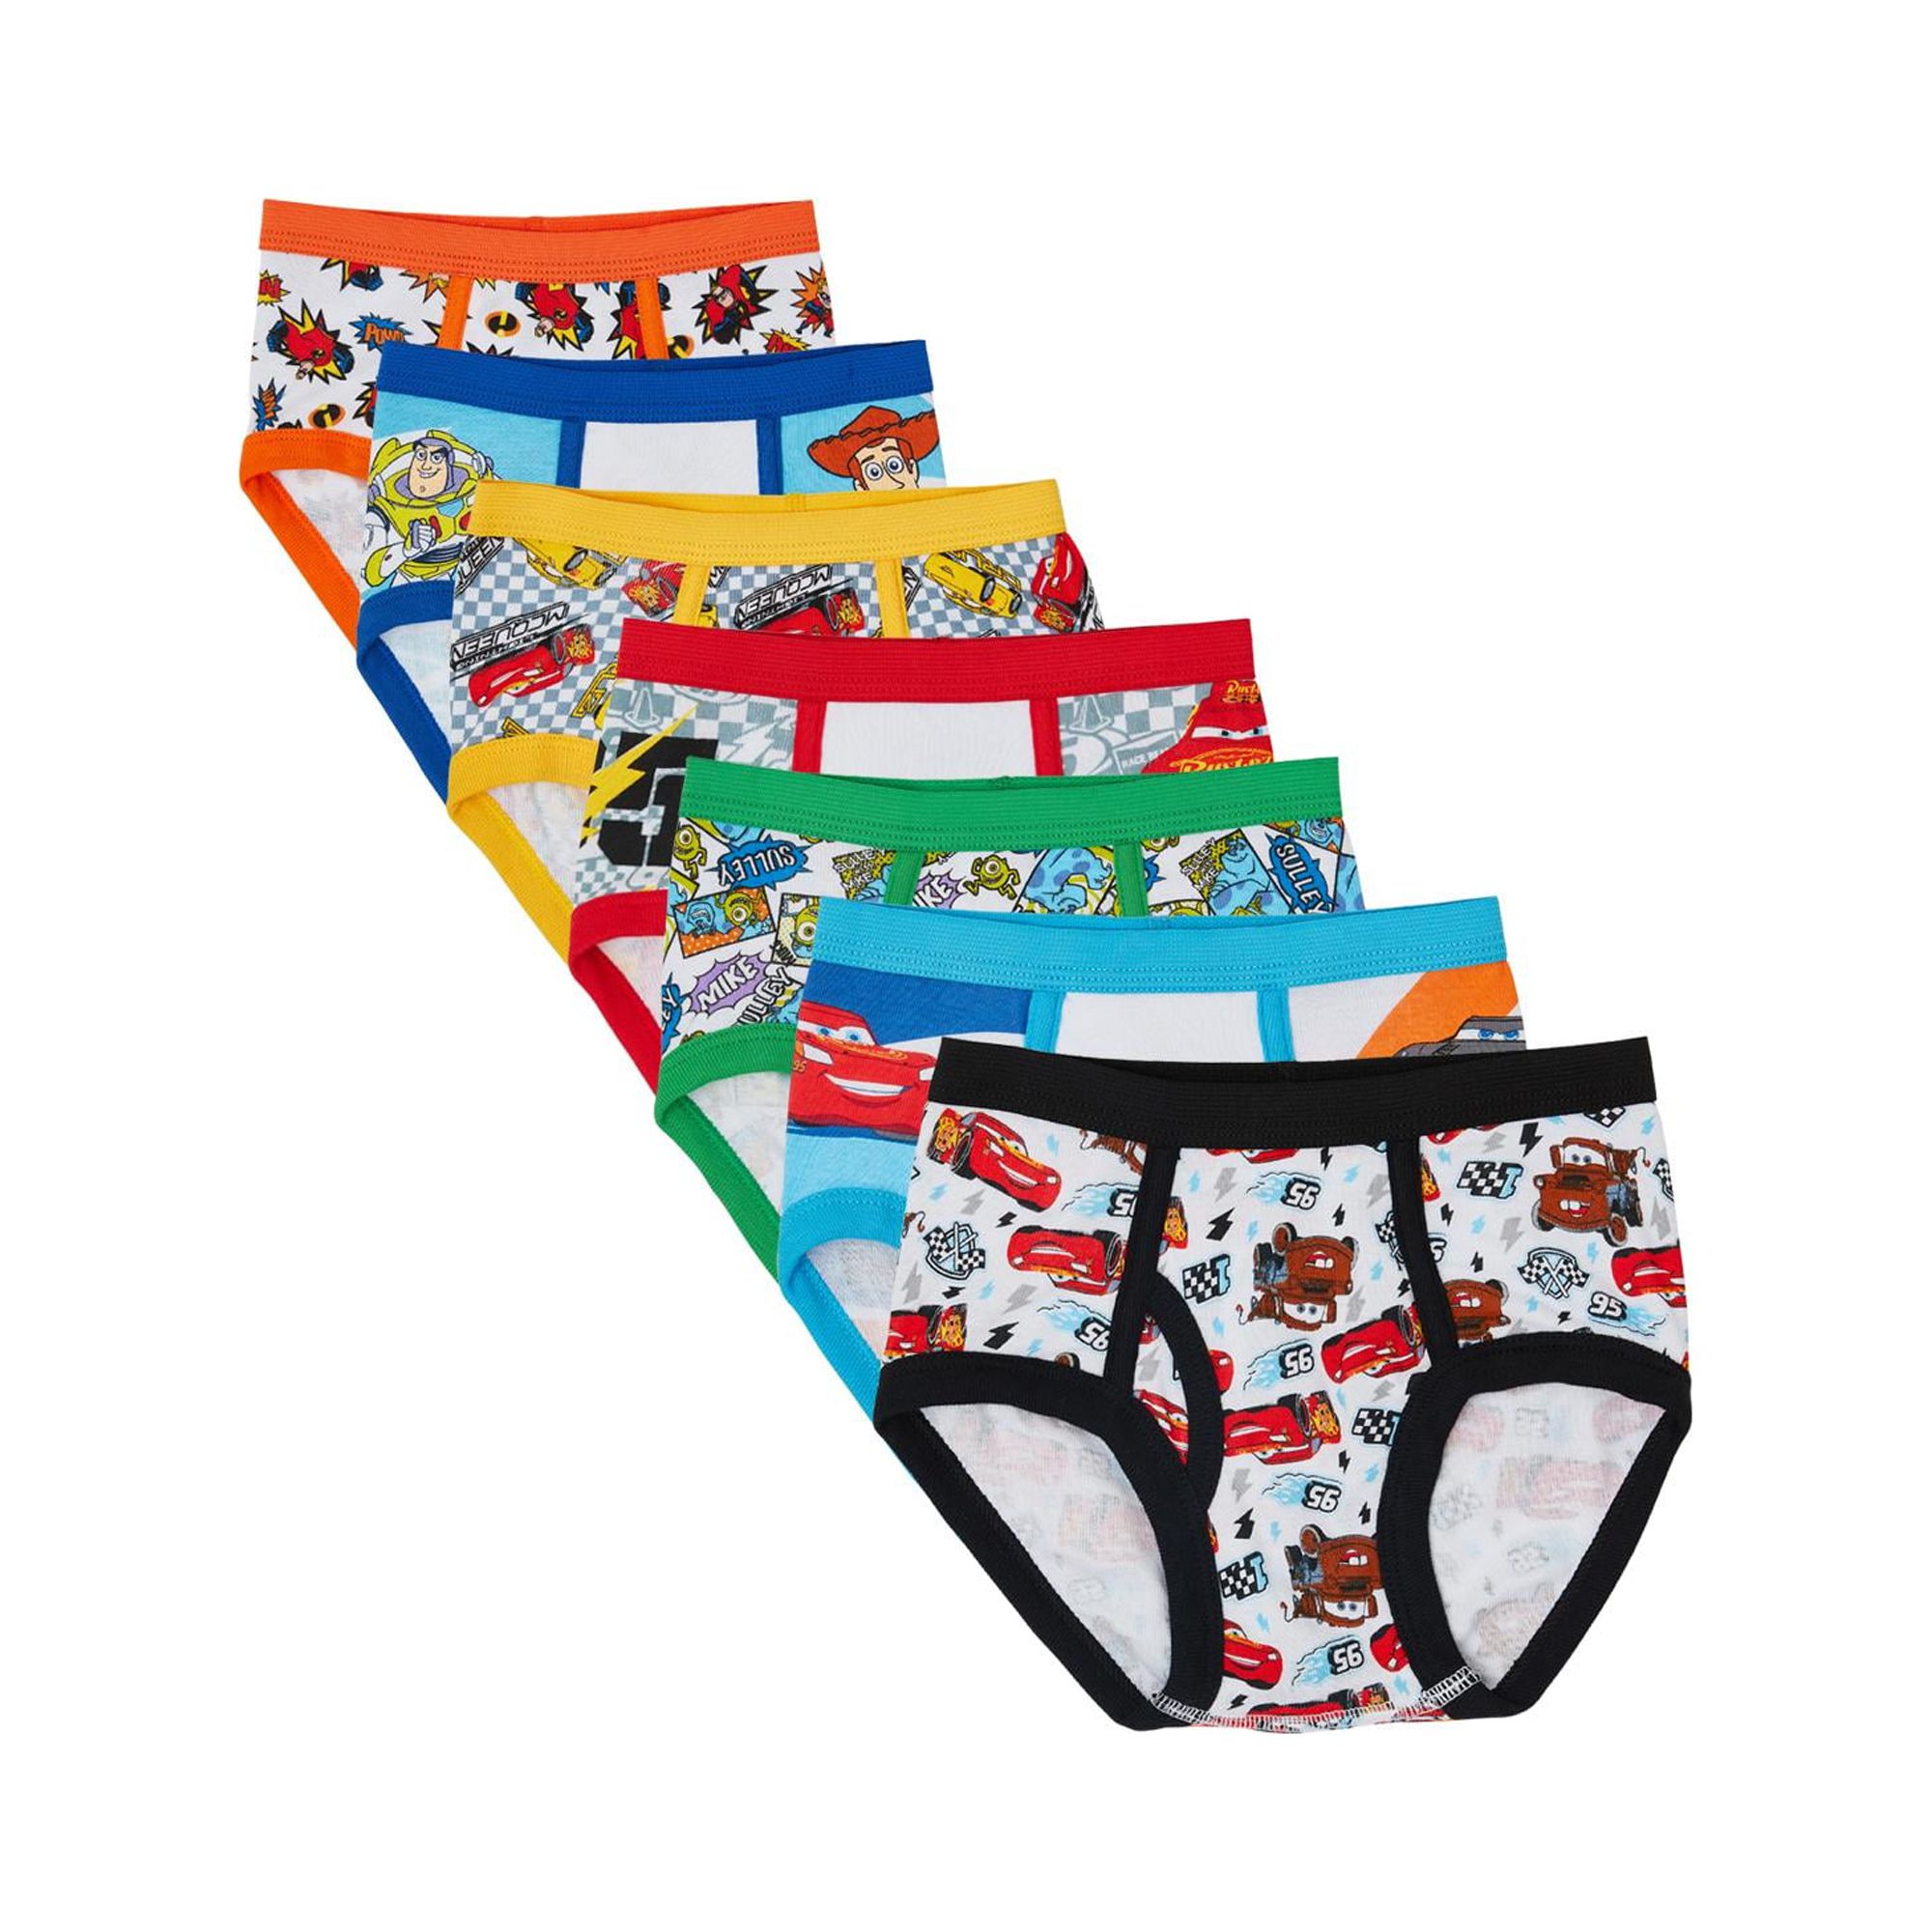 Cars, Toy Story & Monsters Inc. Variety Toddler Boy Brief Underwear, 7-Pack, Sizes 3T-4T - image 1 of 3